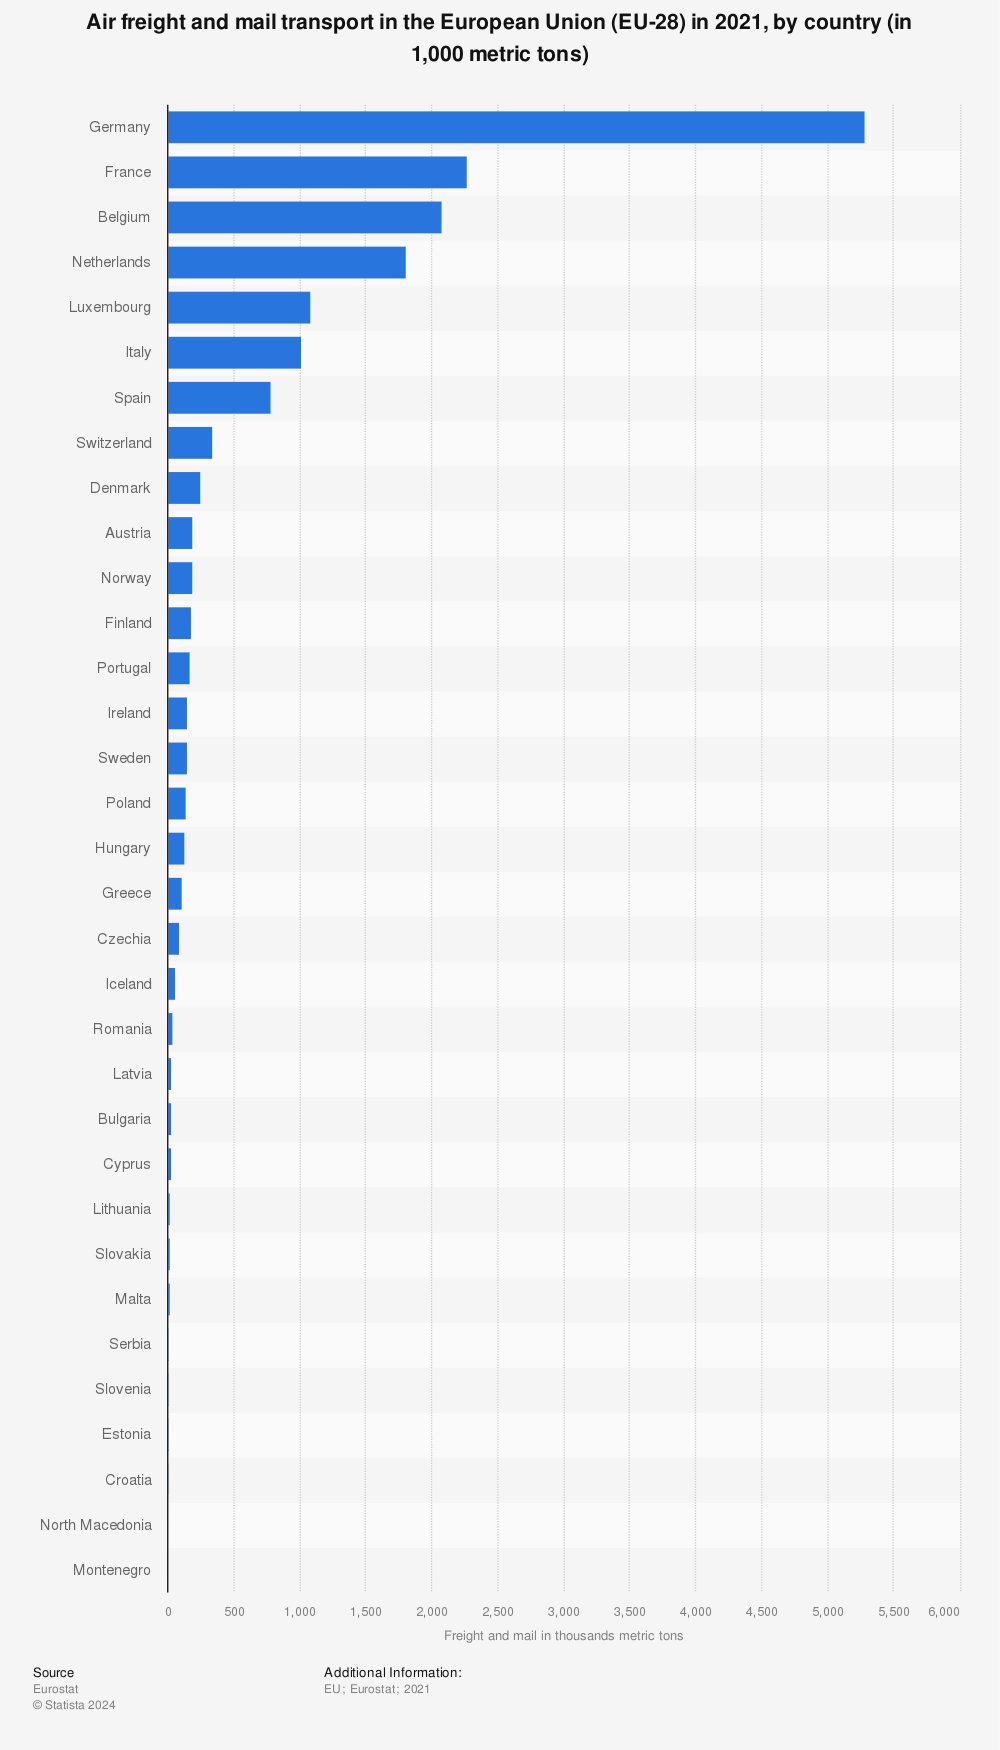 Statistic: Air freight and mail transport in the European Union (EU-28) in 2021, by country (in 1,000 metric tons) | Statista